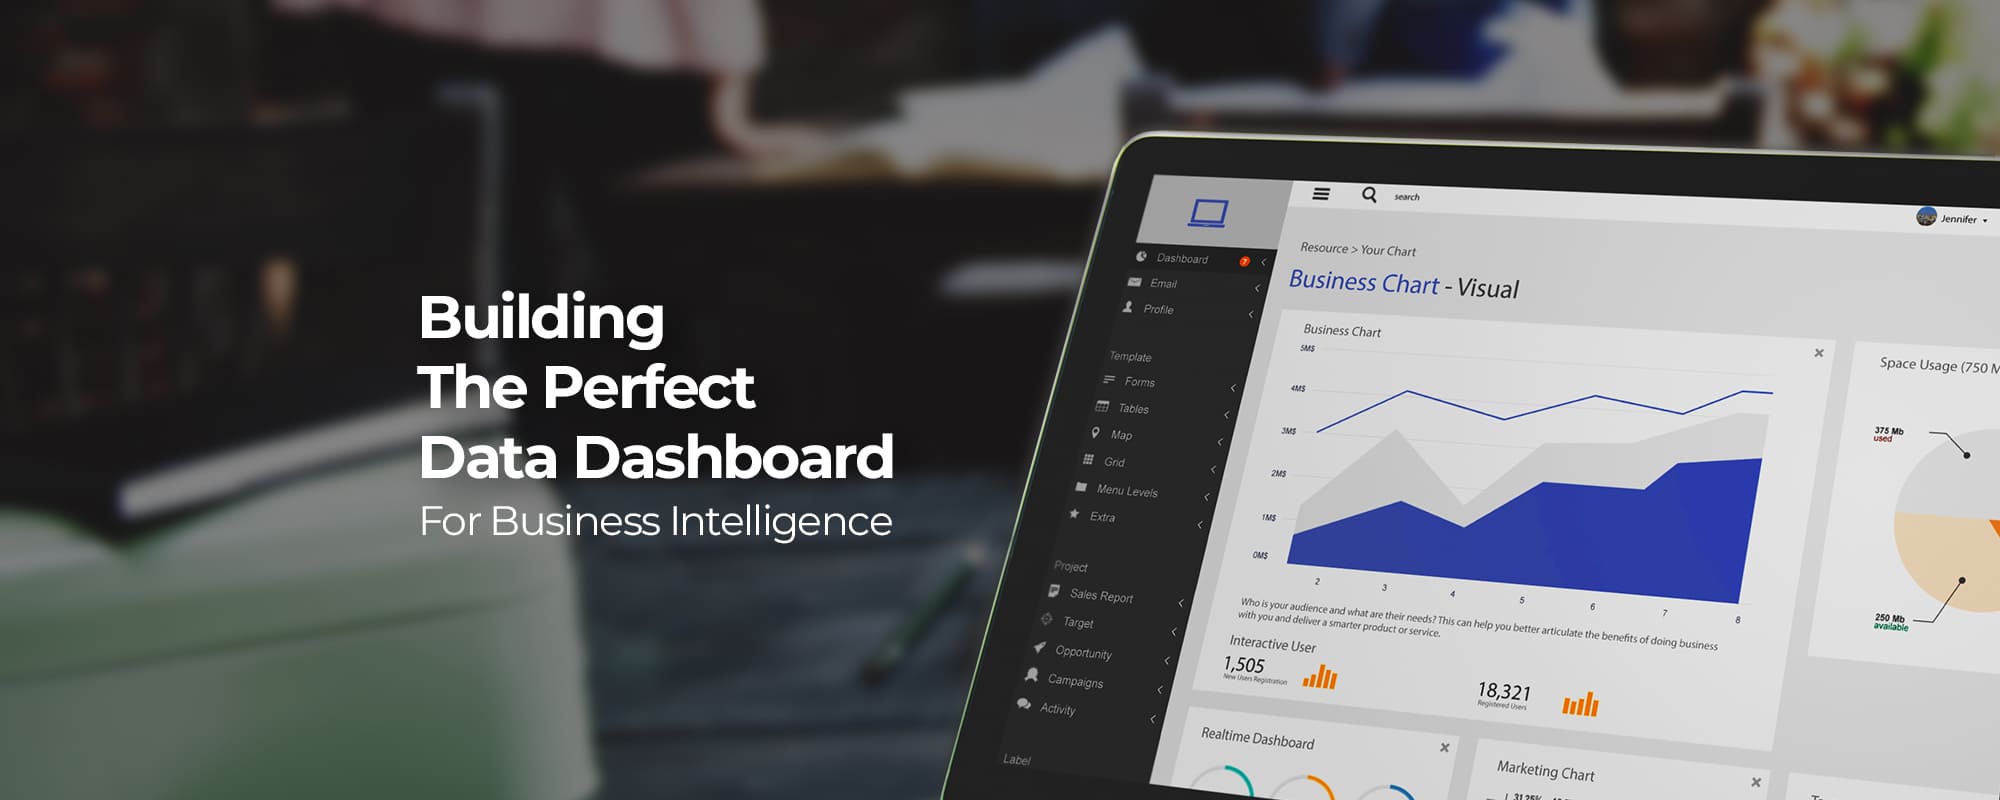 Building the Perfect Data Dashboard for Business Intelligence